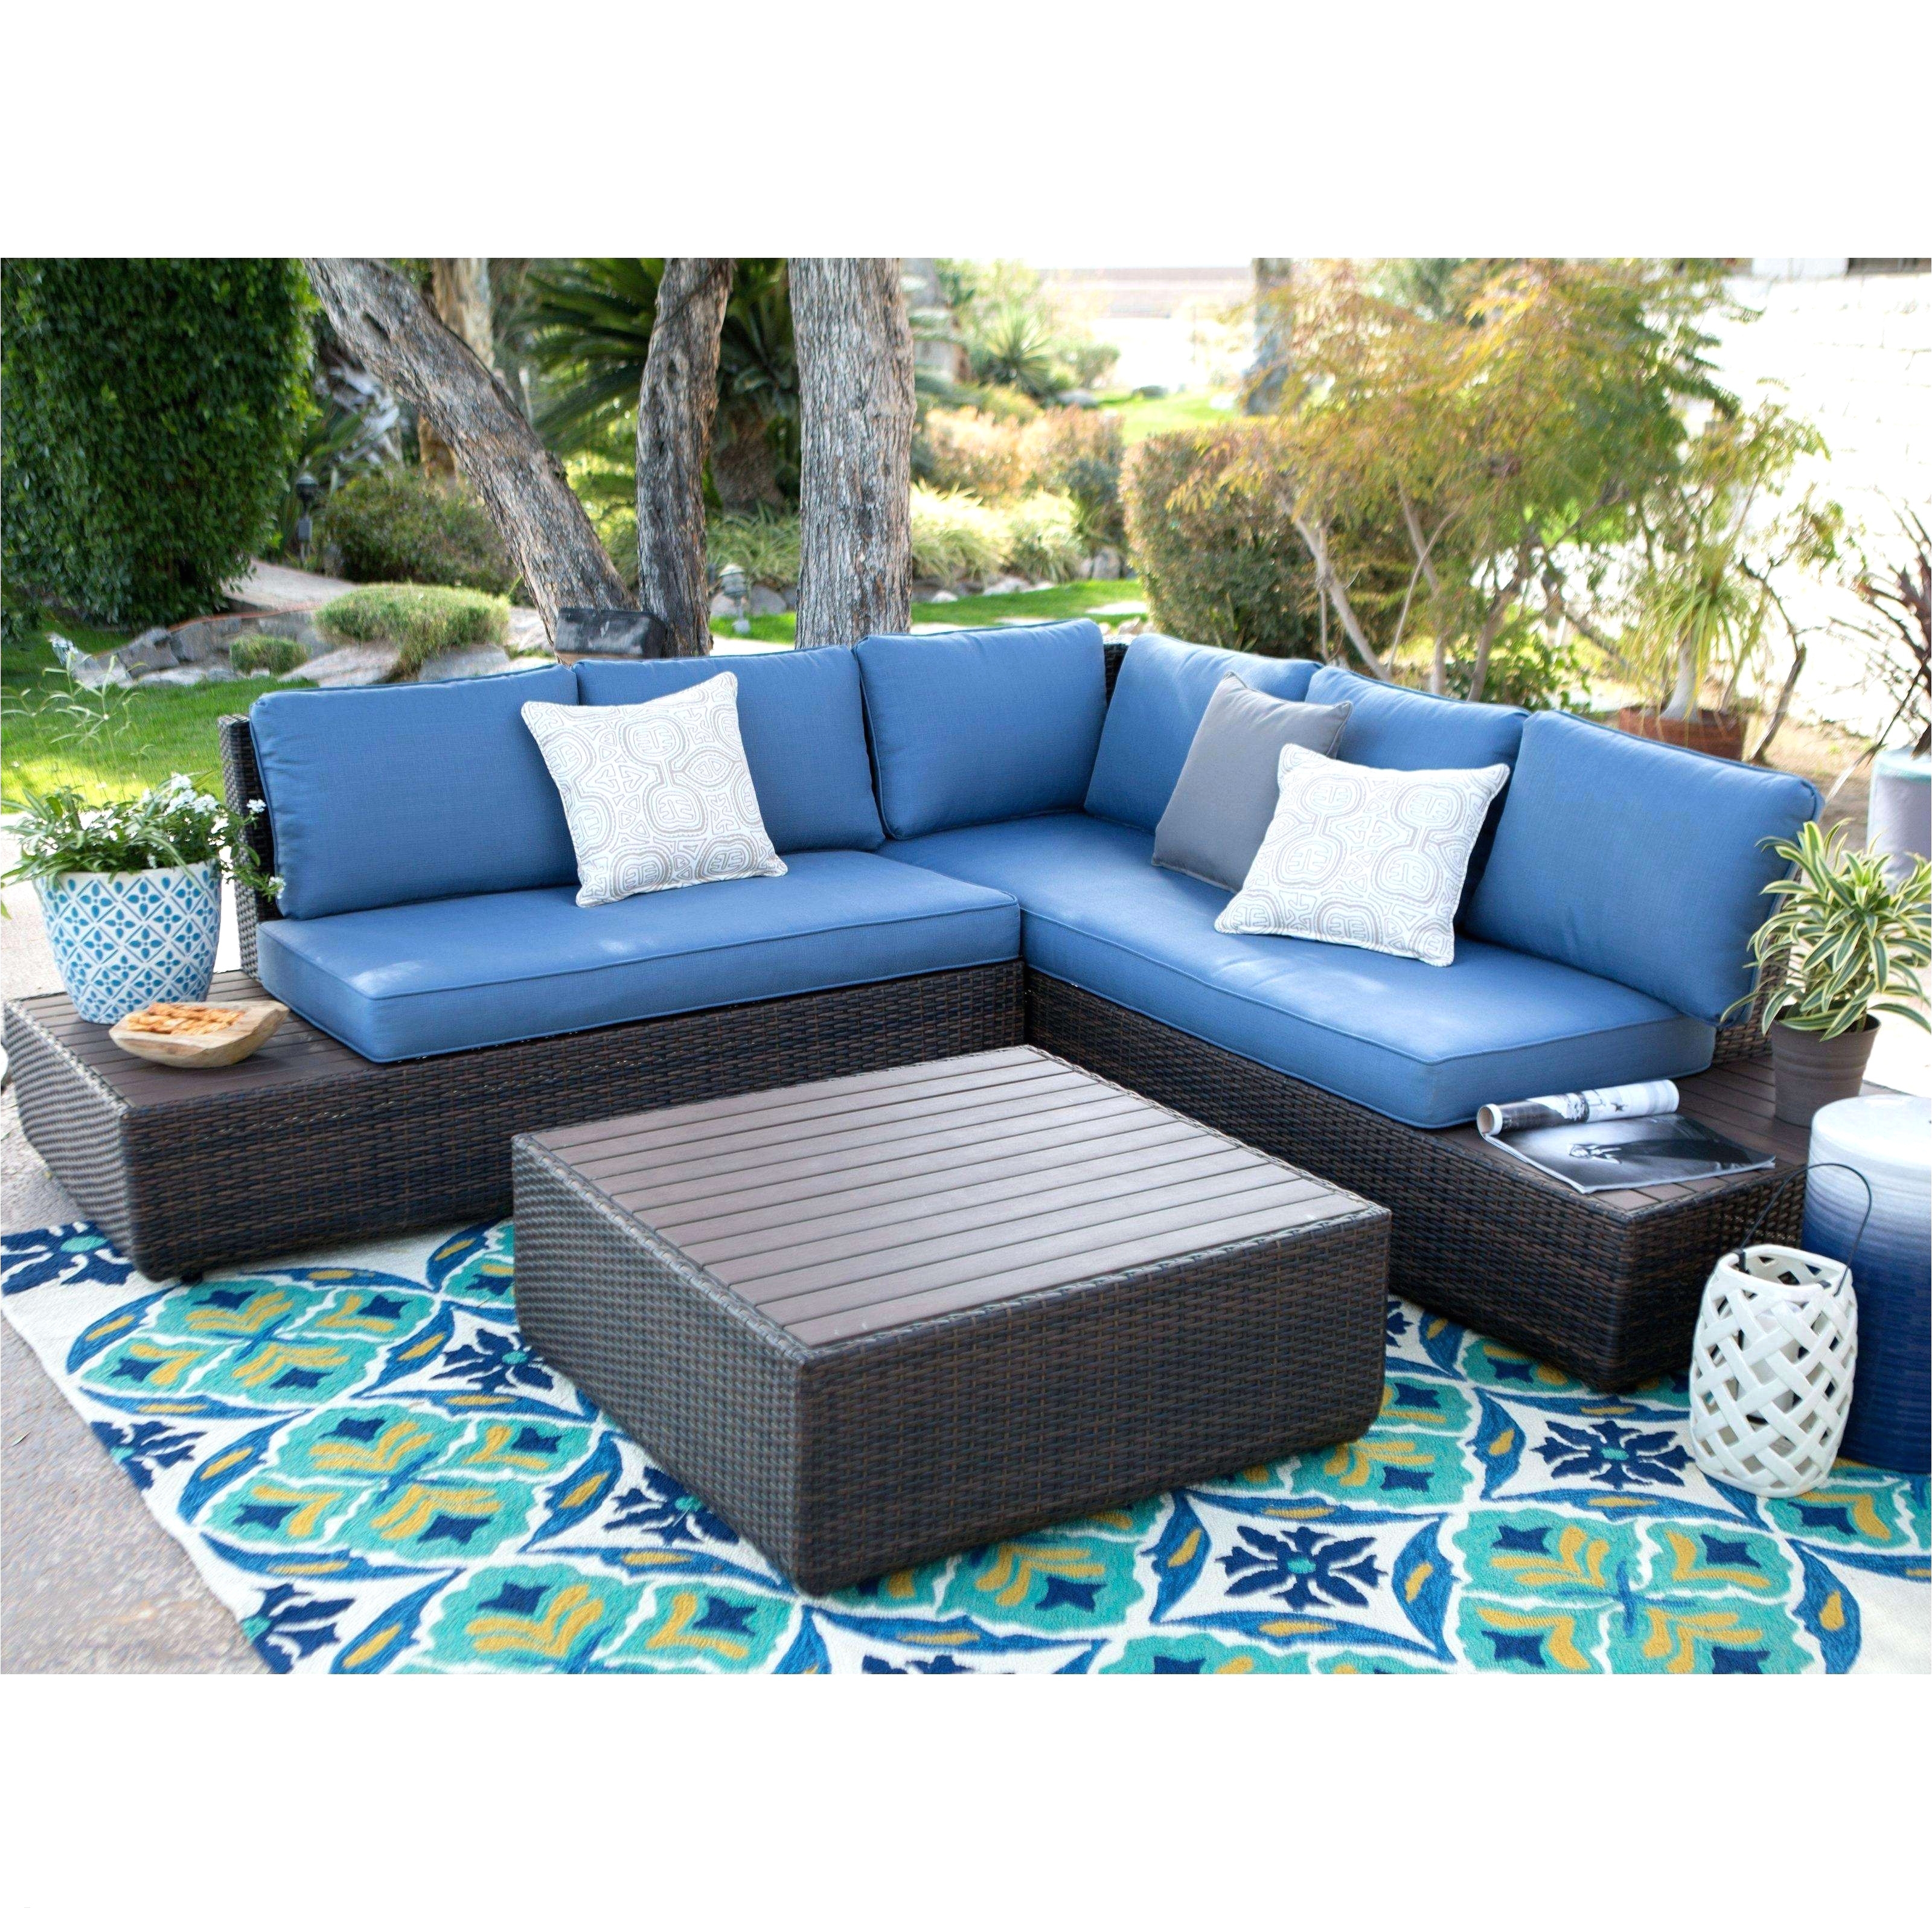 Outdoor Table and Chairs at Walmart Brilliant Walmart Outdoor Furniture Bomelconsult Com